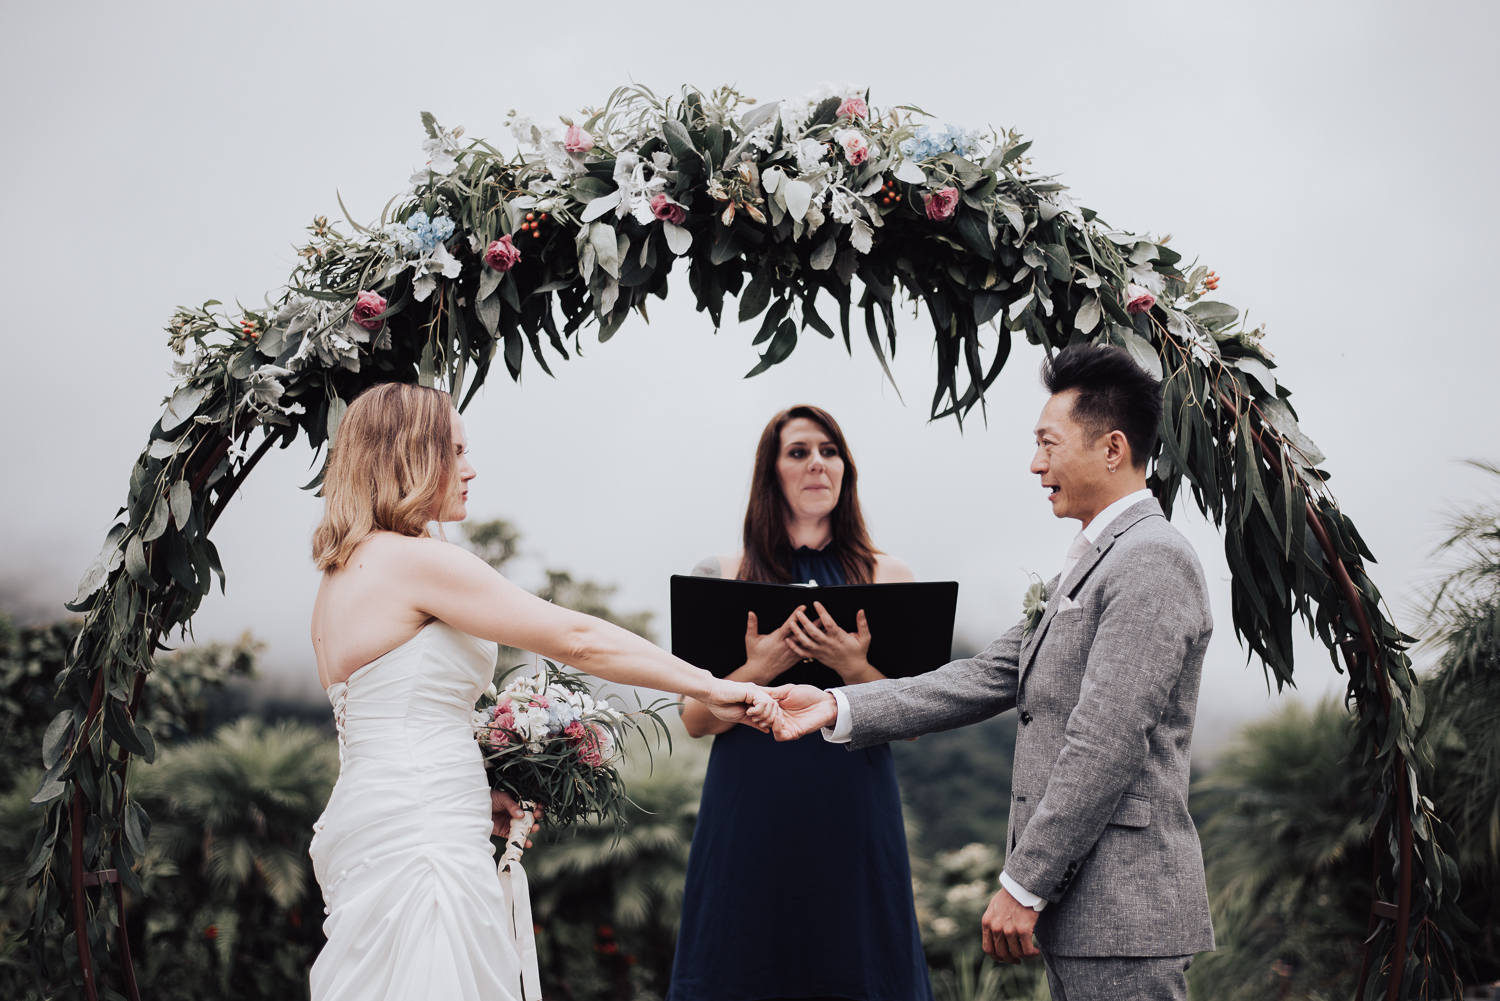 This beautiful destination wedding with just 12 guests took place in Ecuador